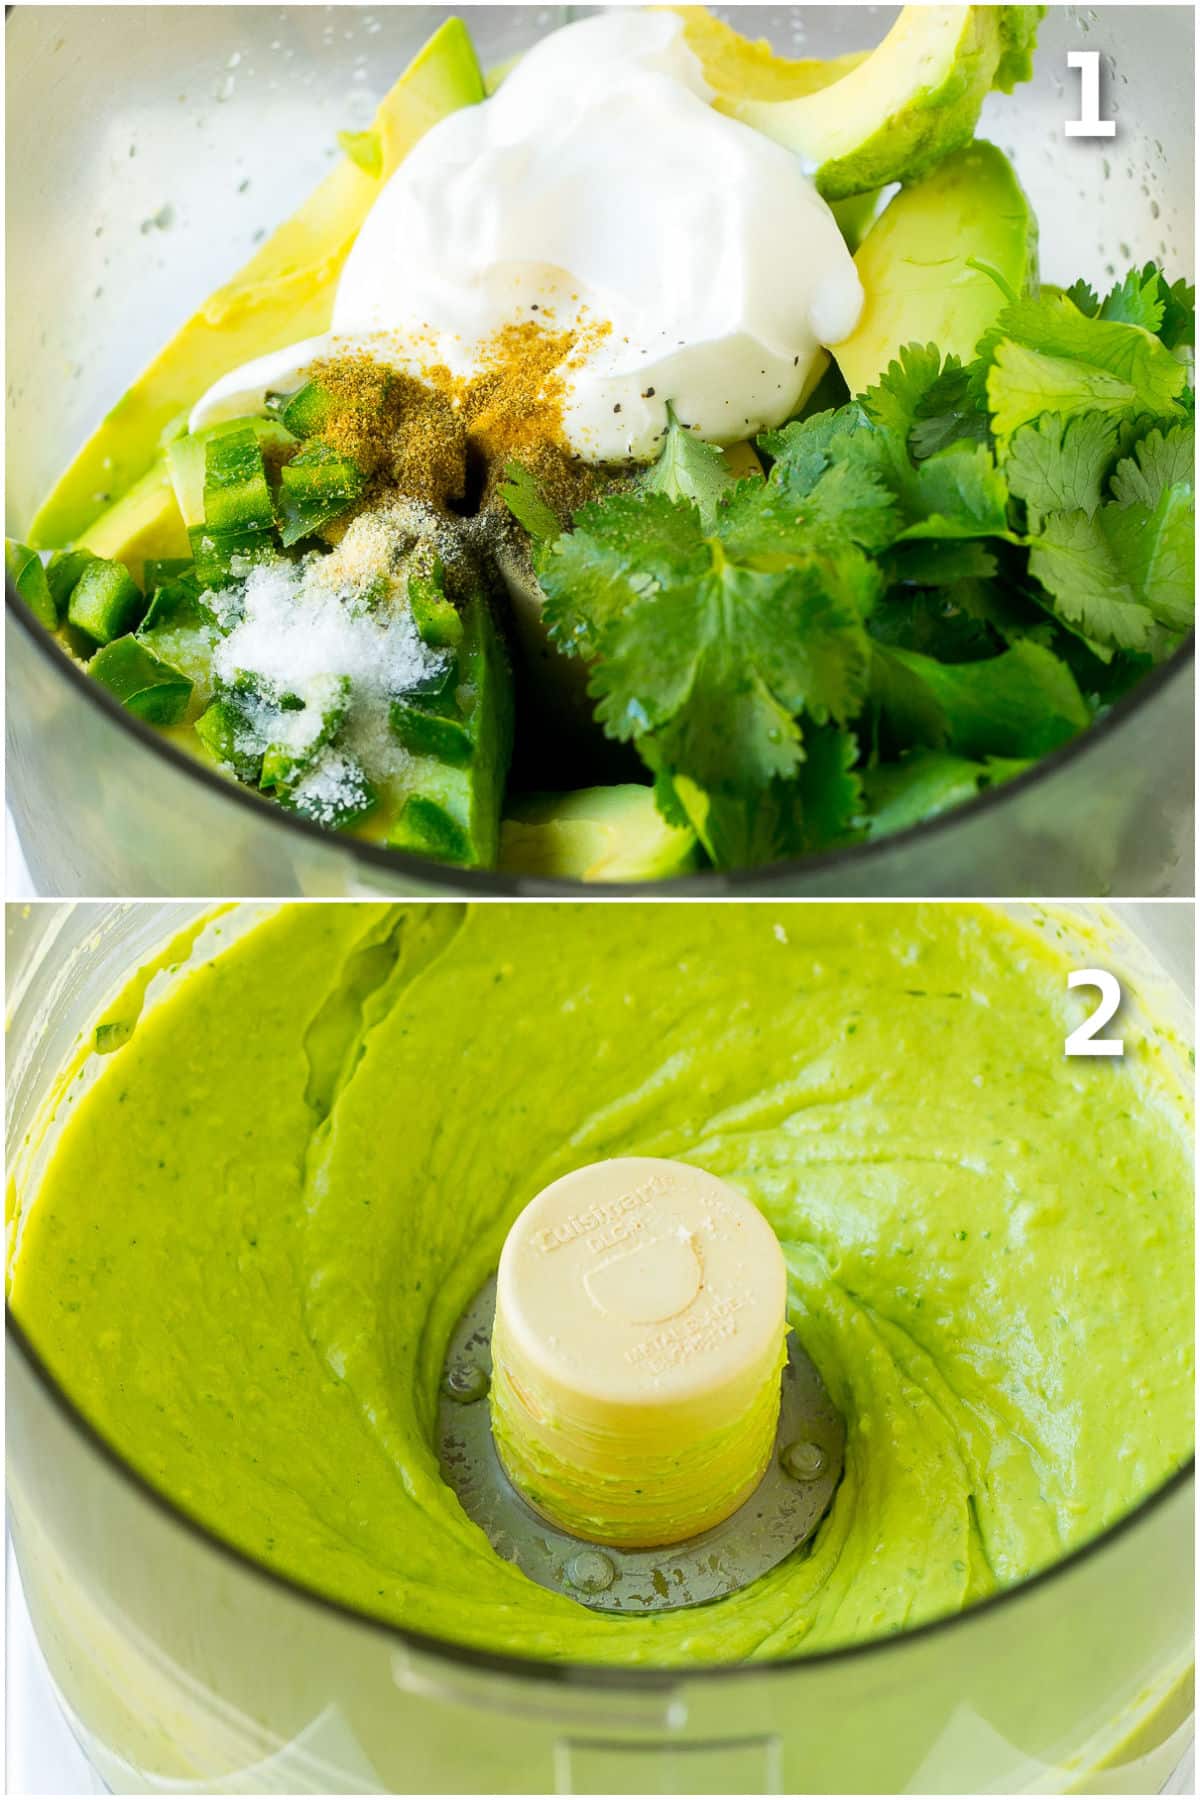 Process shots showing how to blend avocado in a food processor.